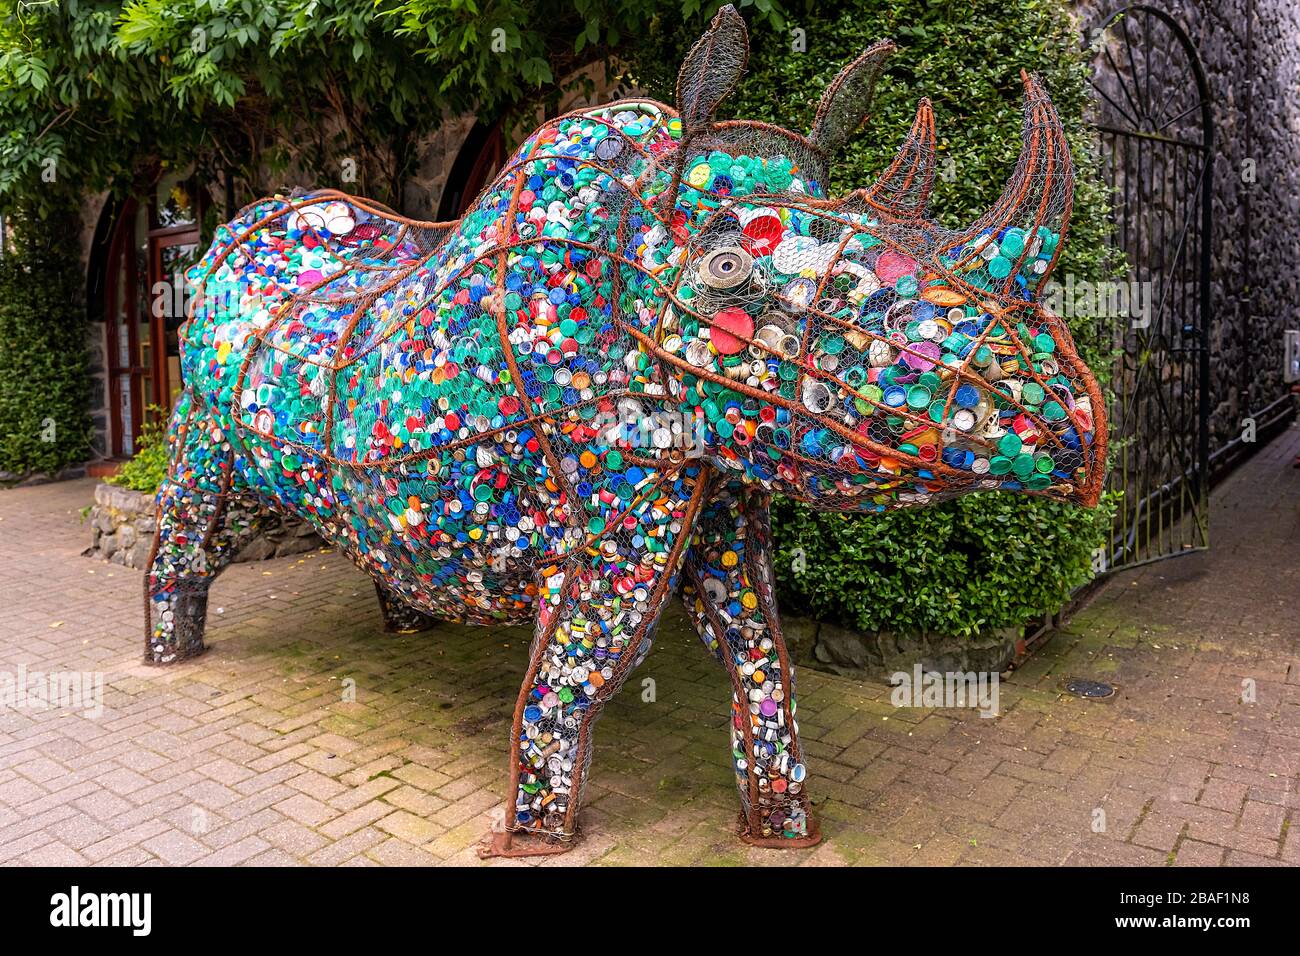 Edith the Rhinocerous sculpture part of The Comunity art Project created by Jacha.. Filled with discarded container tops of varous sizes and colours. Stock Photo